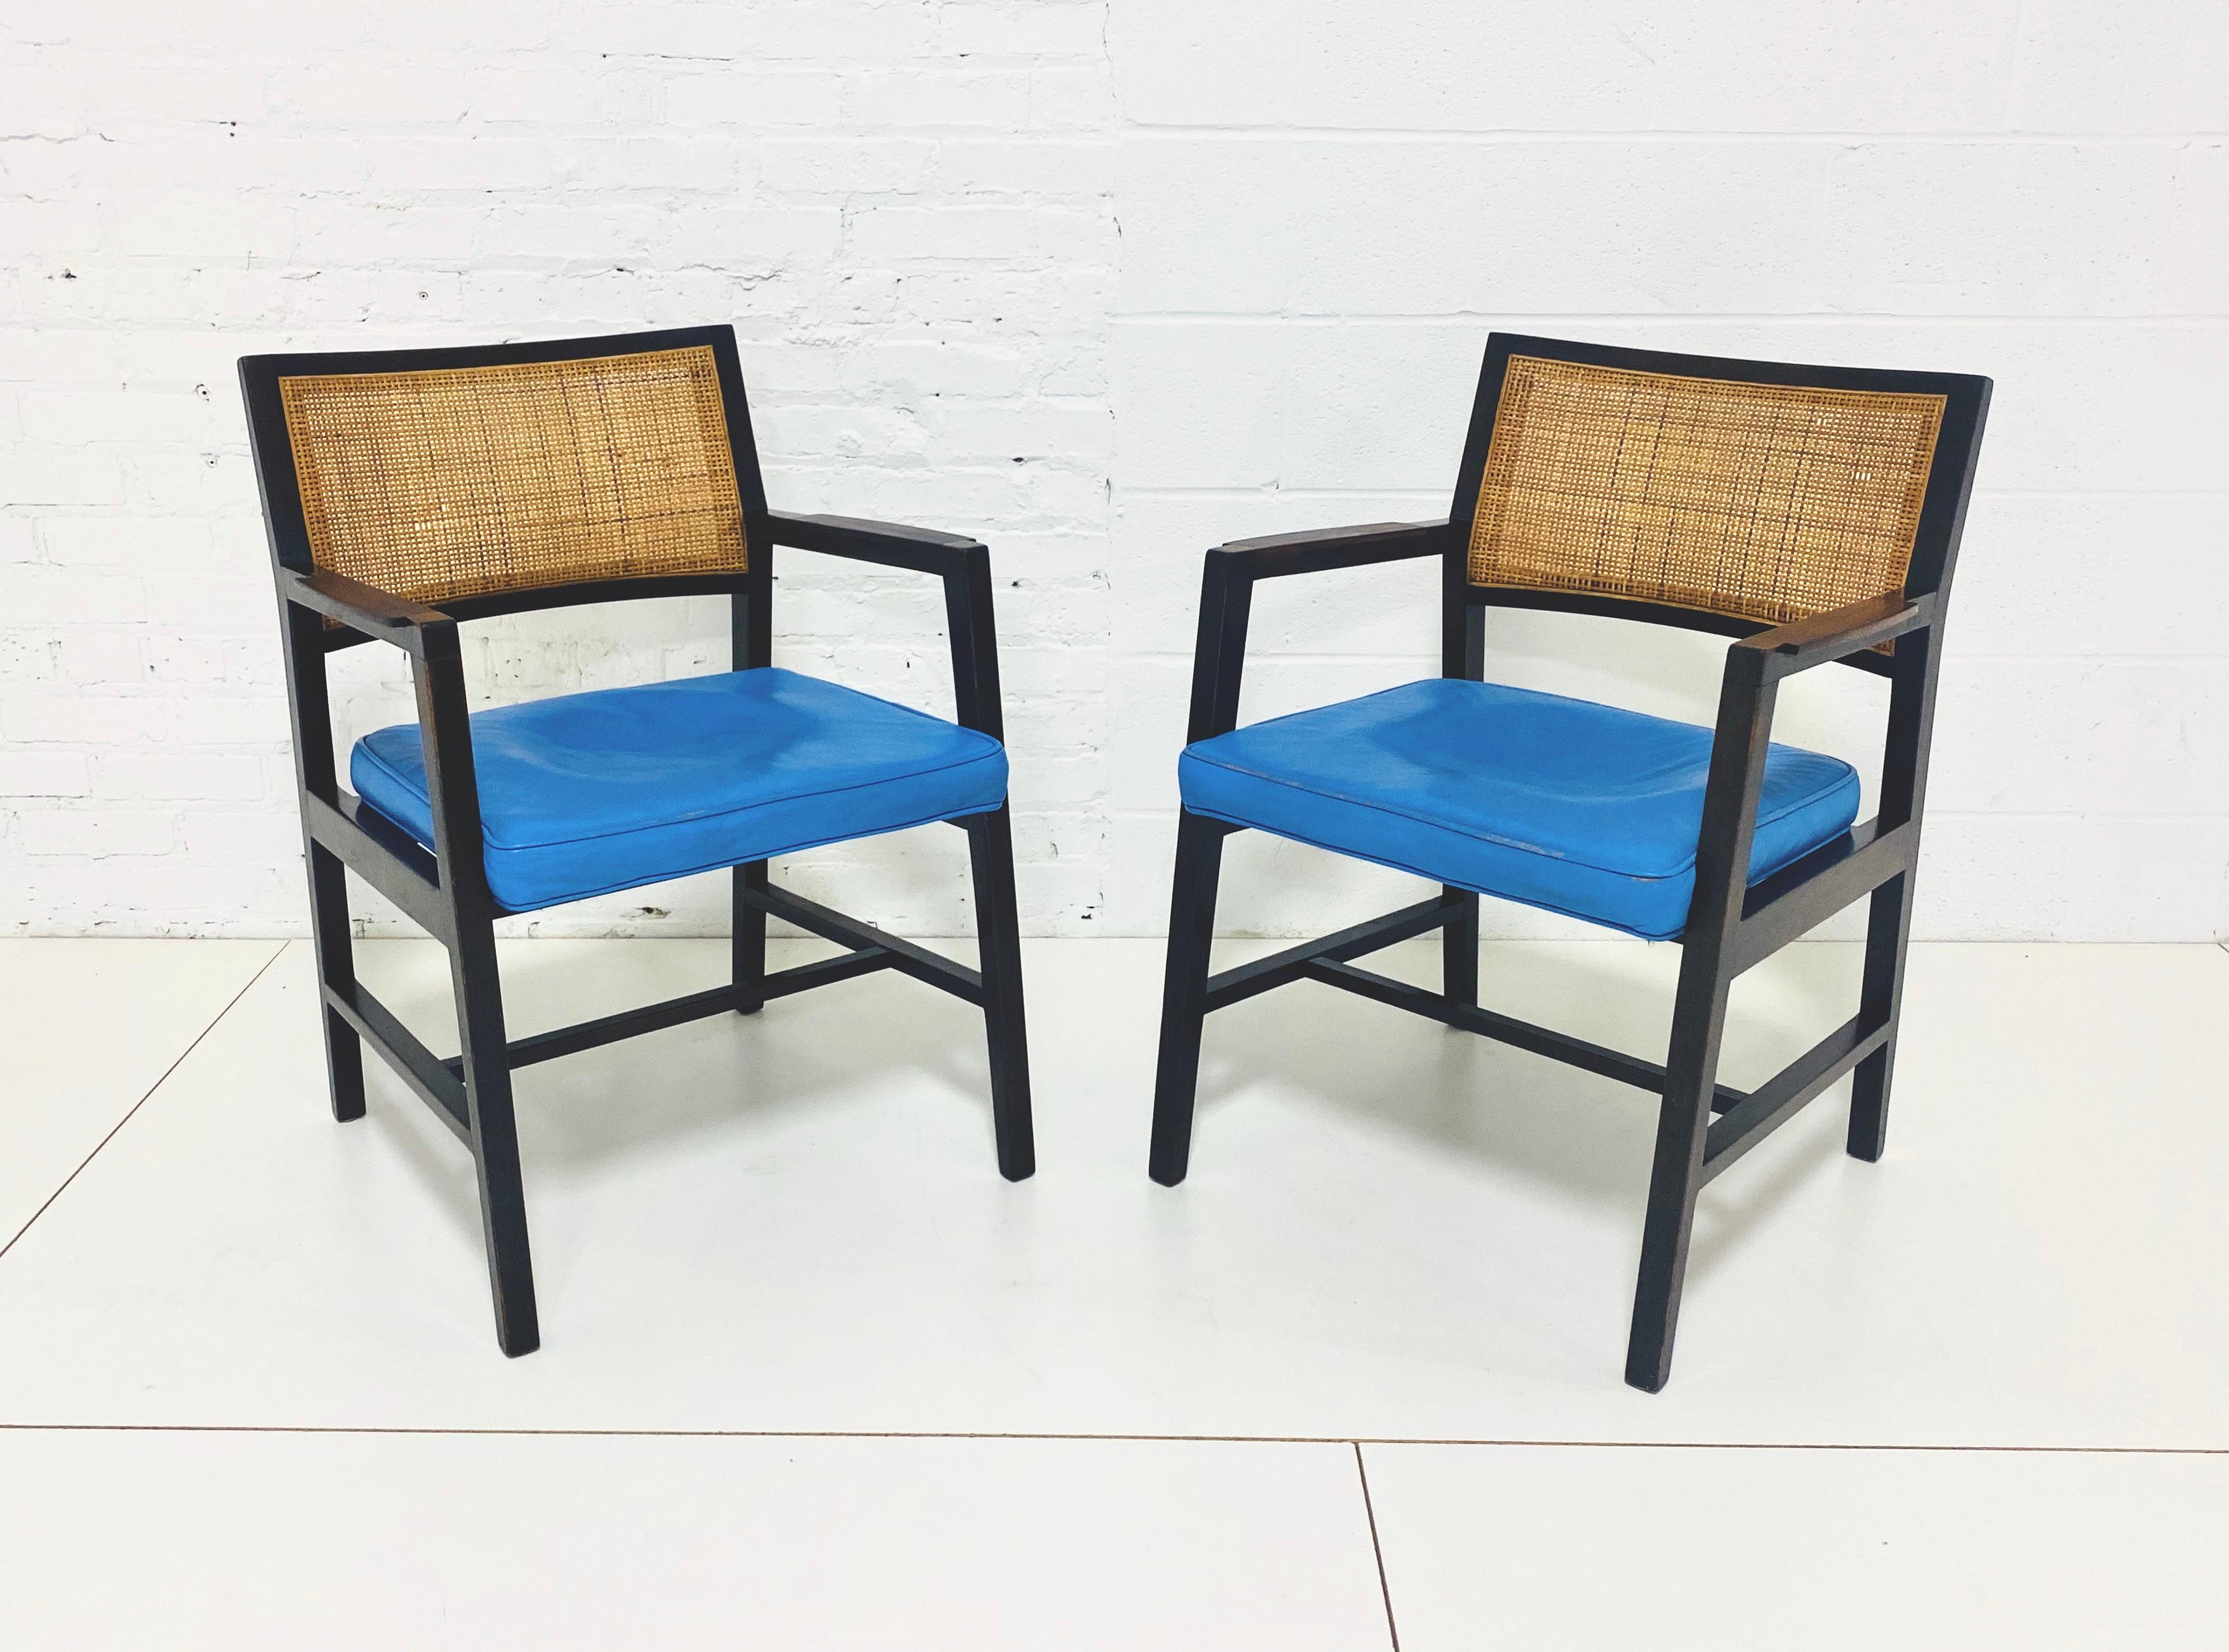 Pair of armchairs in original blue leather with rosewood arms cane backs.